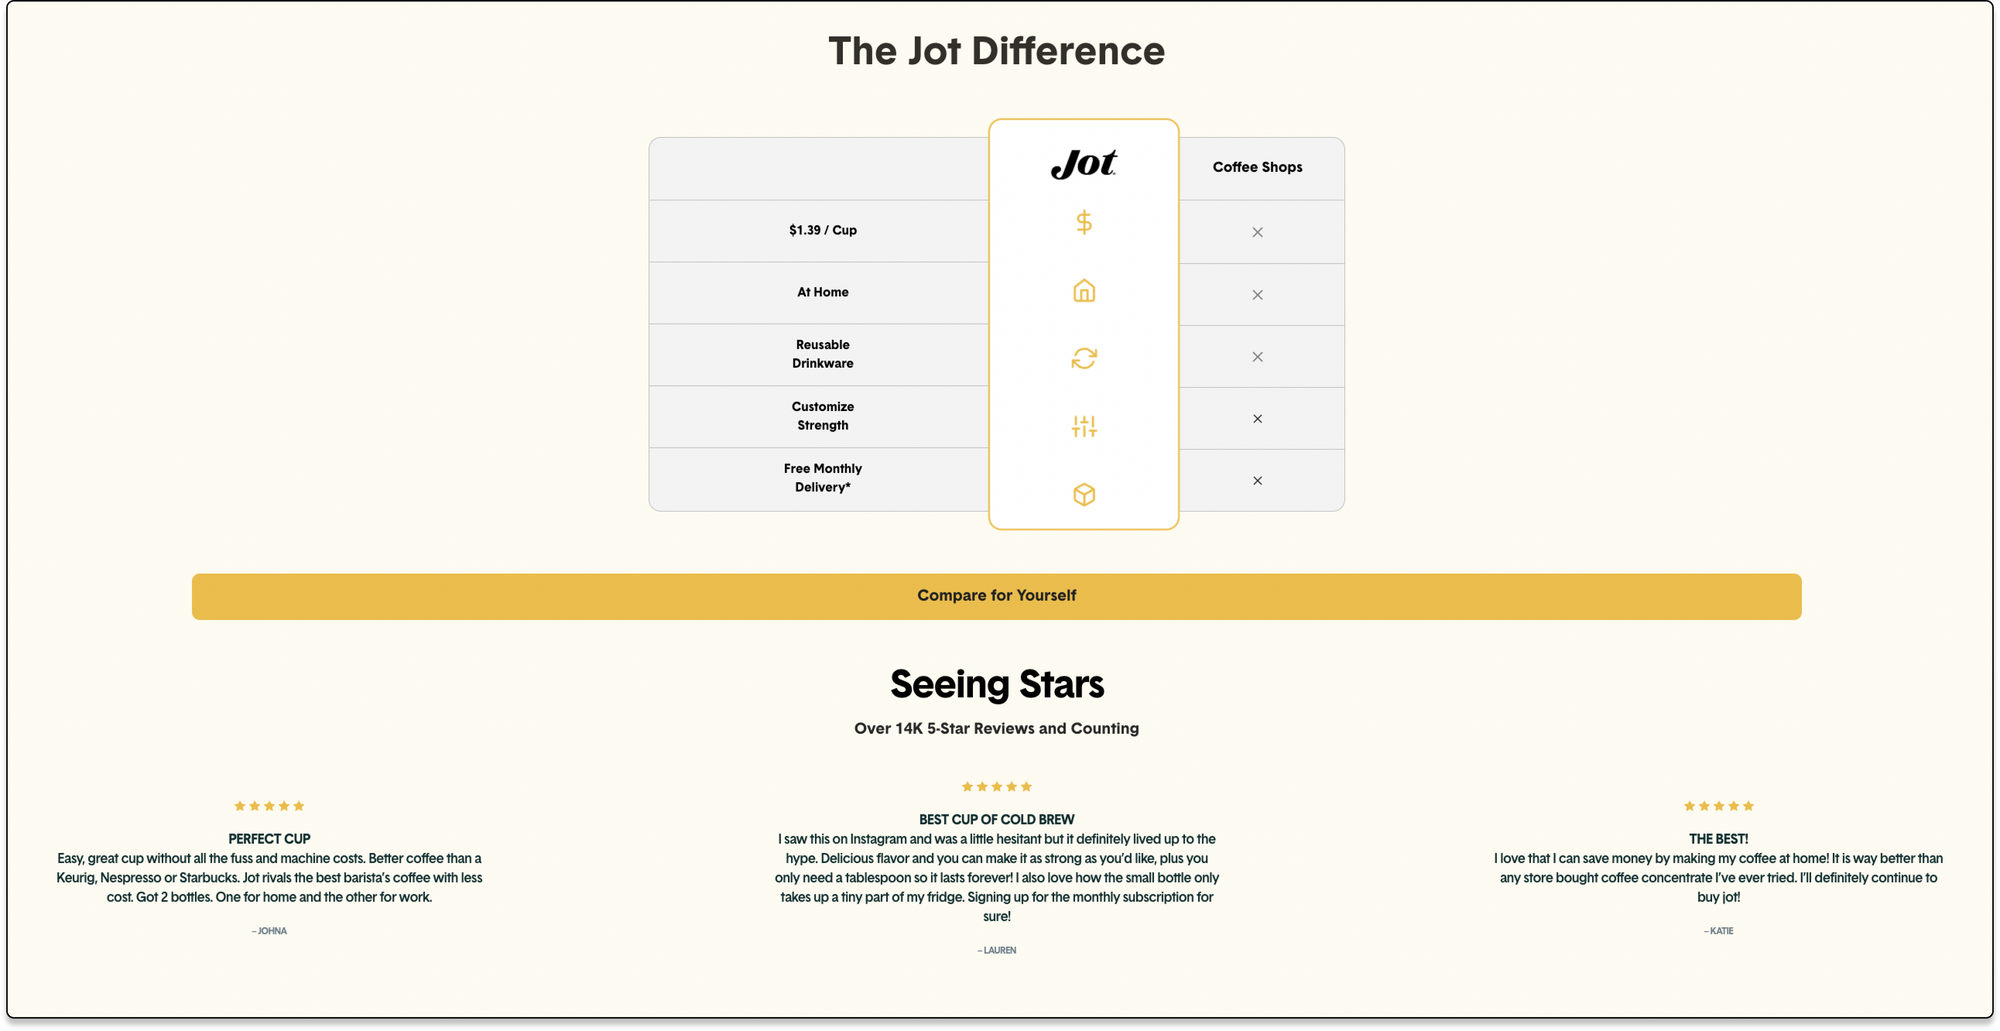 Jot Uses Reviews as Social Proof In Their Product Comparison Section